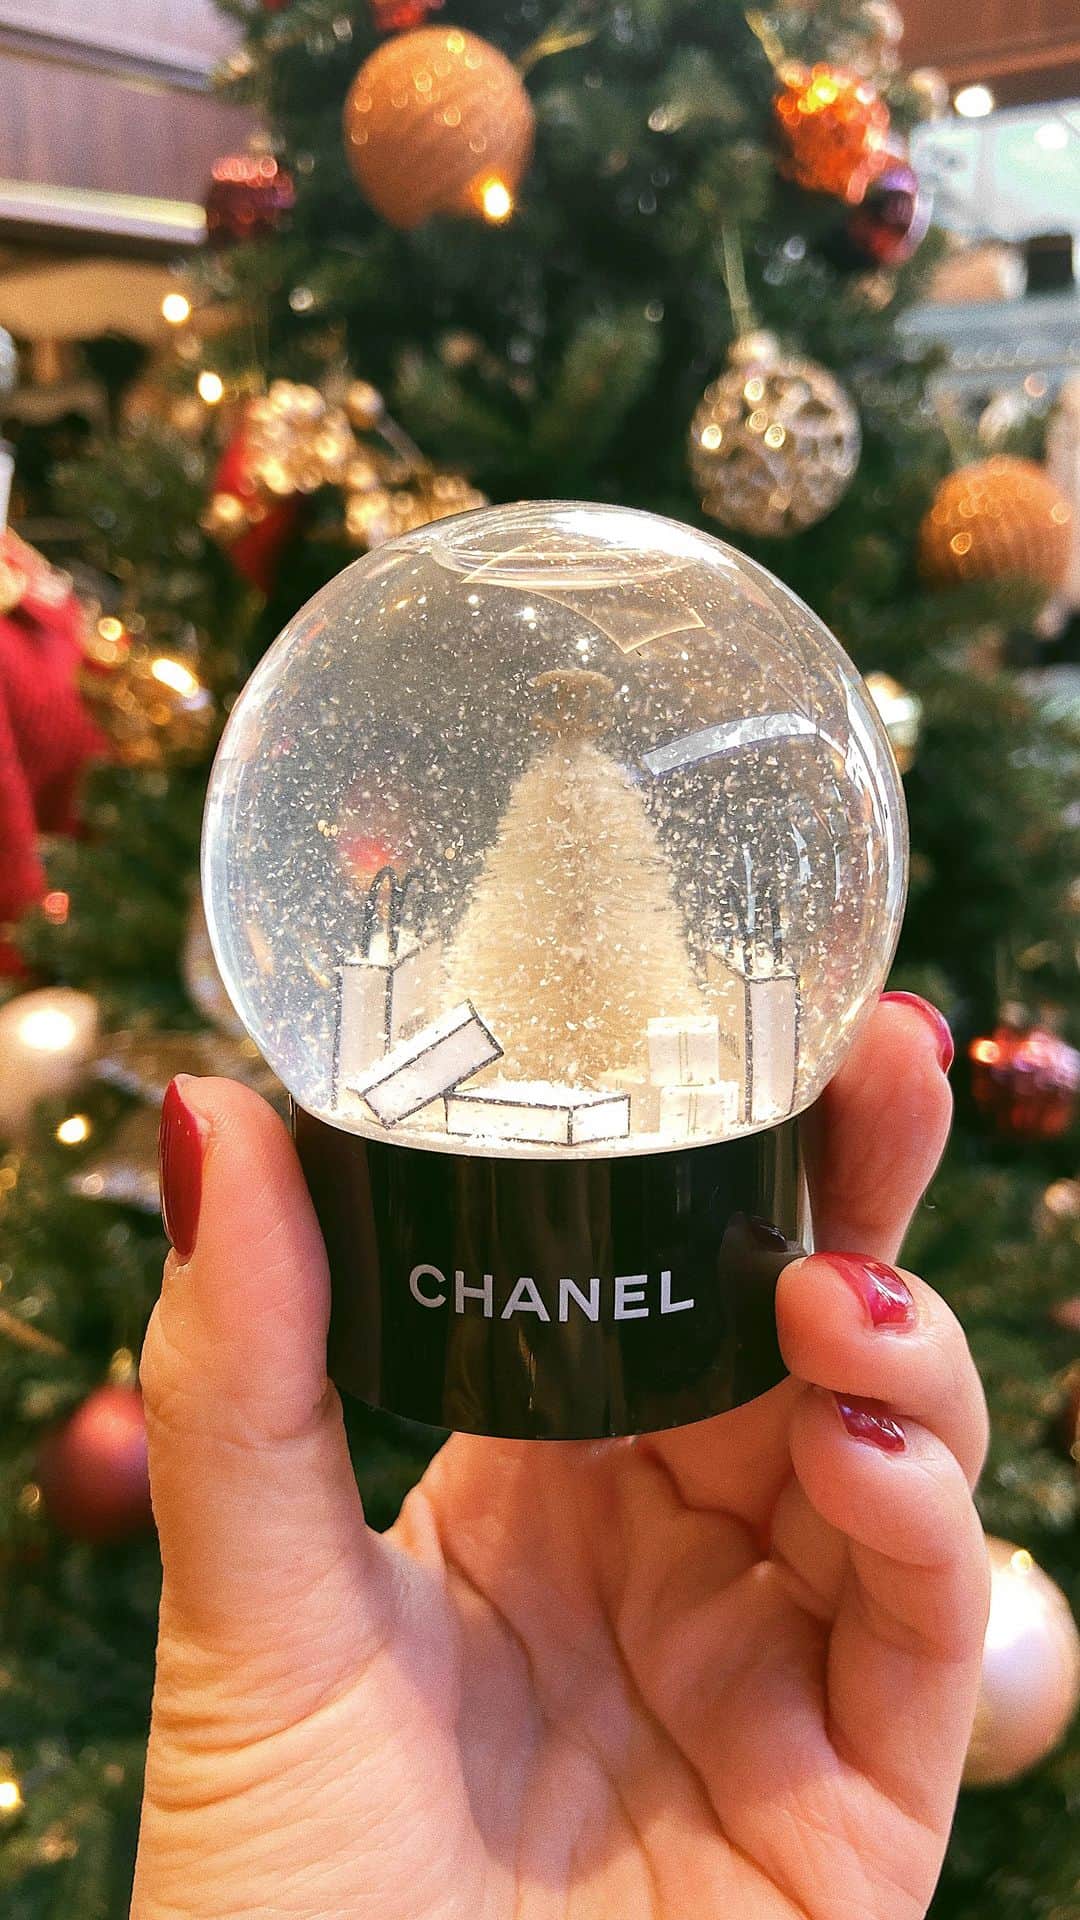 vintage Qooのインスタグラム：「Little Christmas is here #ChanelVintage snowdome❄️   ▼Customer service English/Chinese/Korean/Japanese *Please feel free to contact us! *商品が見つからない場合にはDMにてお問い合わせください   ▼International shipping via our online store. Link in bio.  #tokyovintageshop #오모테산도 #omotesando #aoyama #表参道 #명품빈티지 #빈티지패션 #도쿄빈티지샵  #ヴィンテージファッション #ヴィンテージショップ  #chanel #vintagechanel #chanelclassic #chanellover #빈티지샤넬 #샤넬  #シャネル #snowdome」